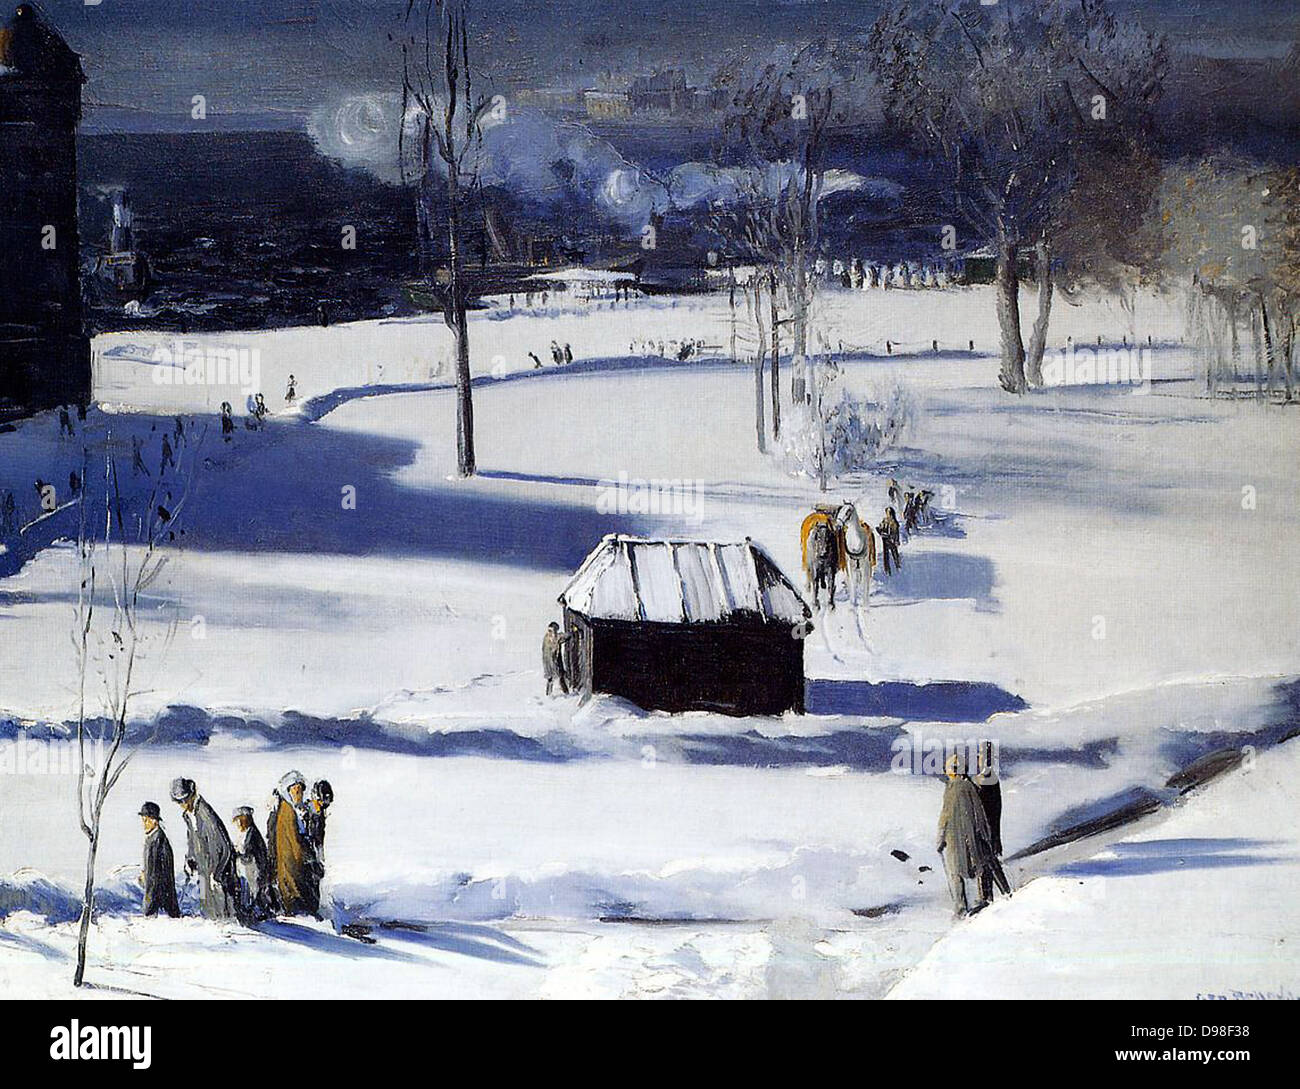 George Wesley Bellows, American (Ashcan School) Painter, 1882-1925.'Blue Snow, the Battery' 1910 Stock Photo